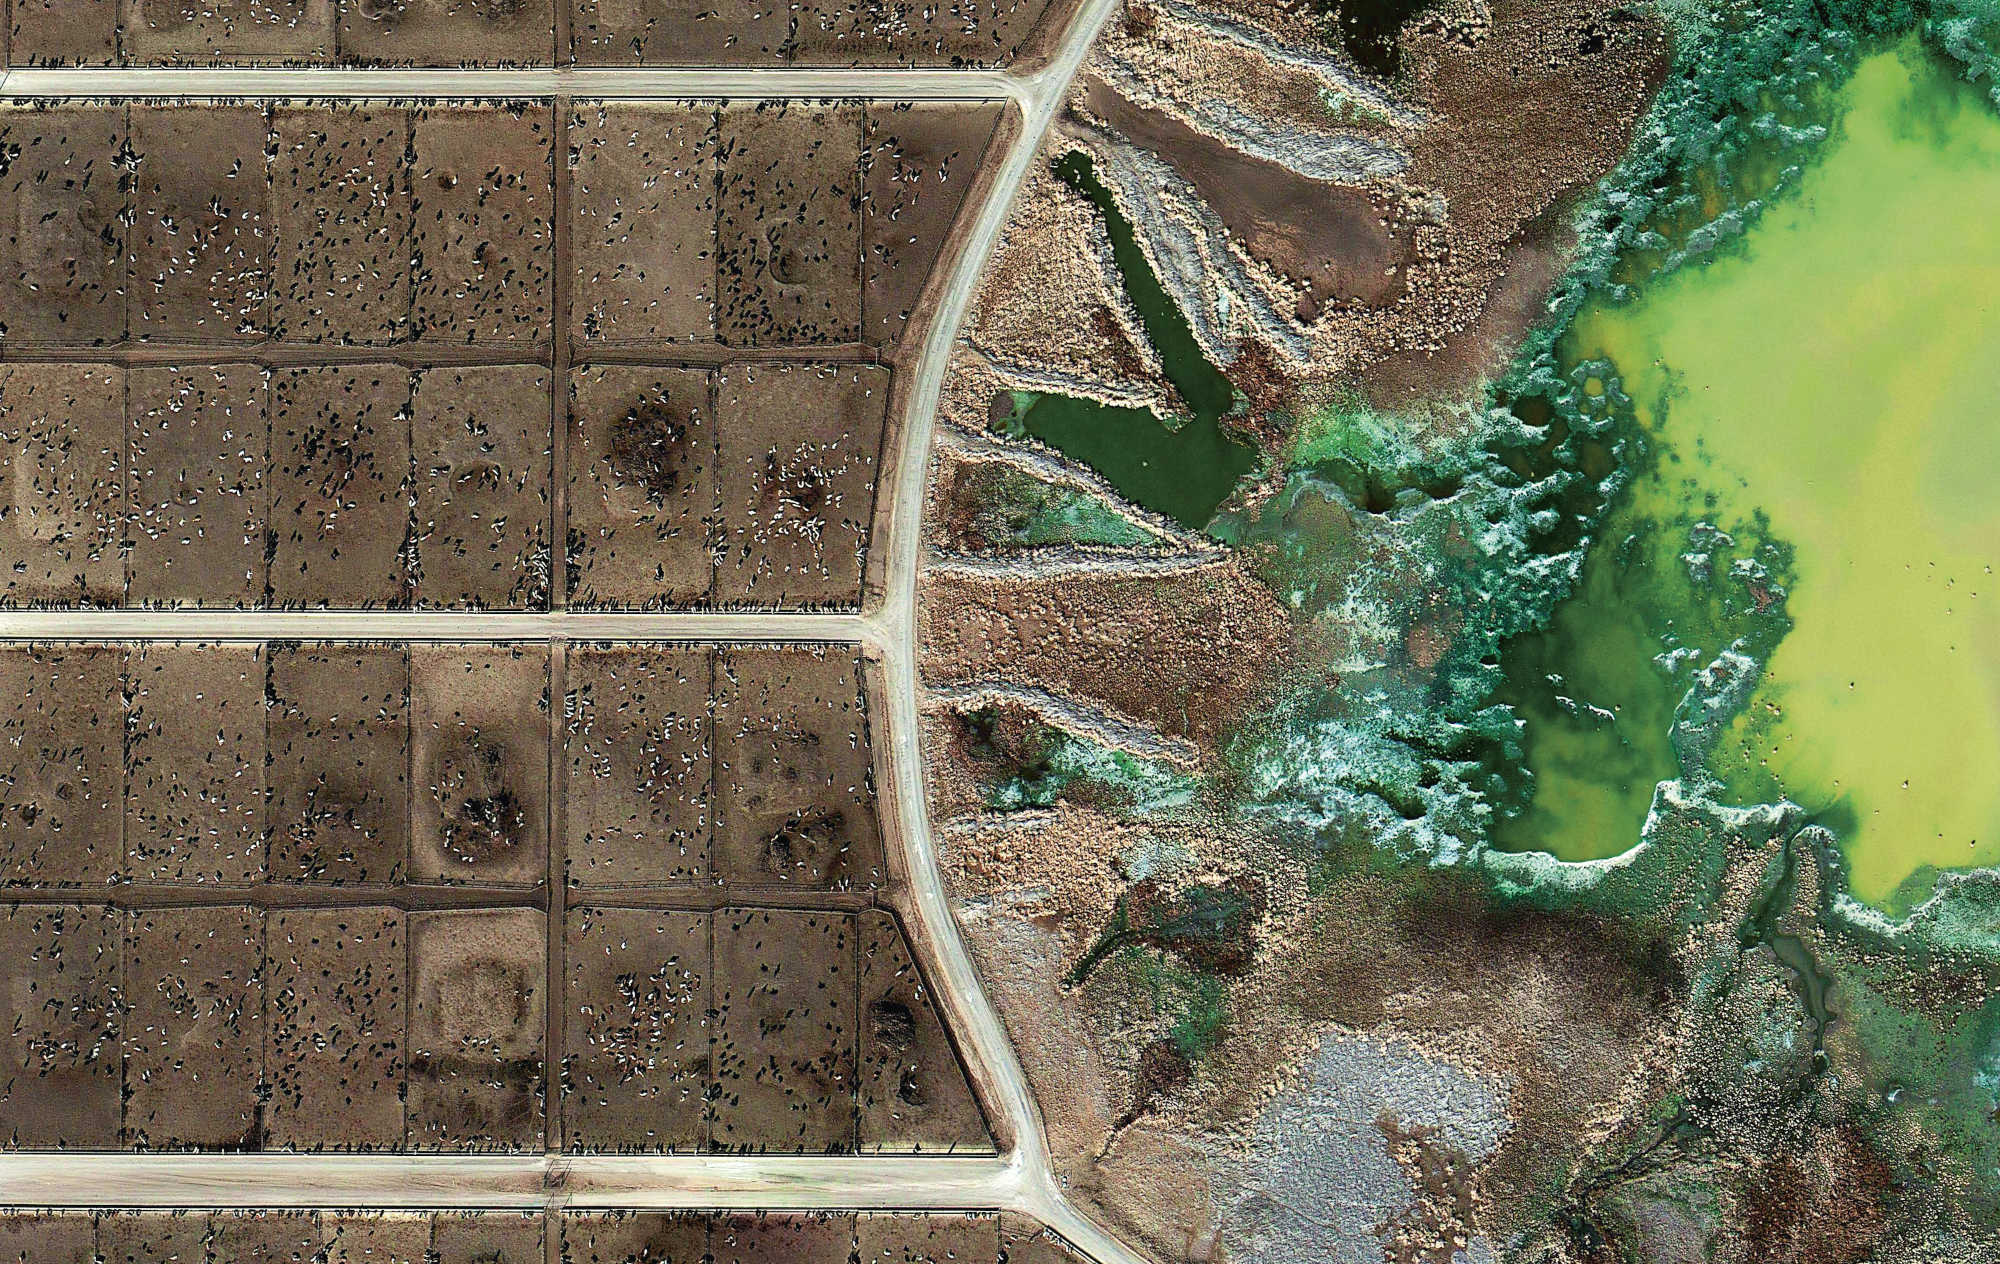 Feedlots, Mishka Henner, 2012–13. Tascosa Feedyard, Bushland, Texas (detail), 2012. Feedlots are cesspools ofraw animal waste being treated by highly polluting chemicals.
